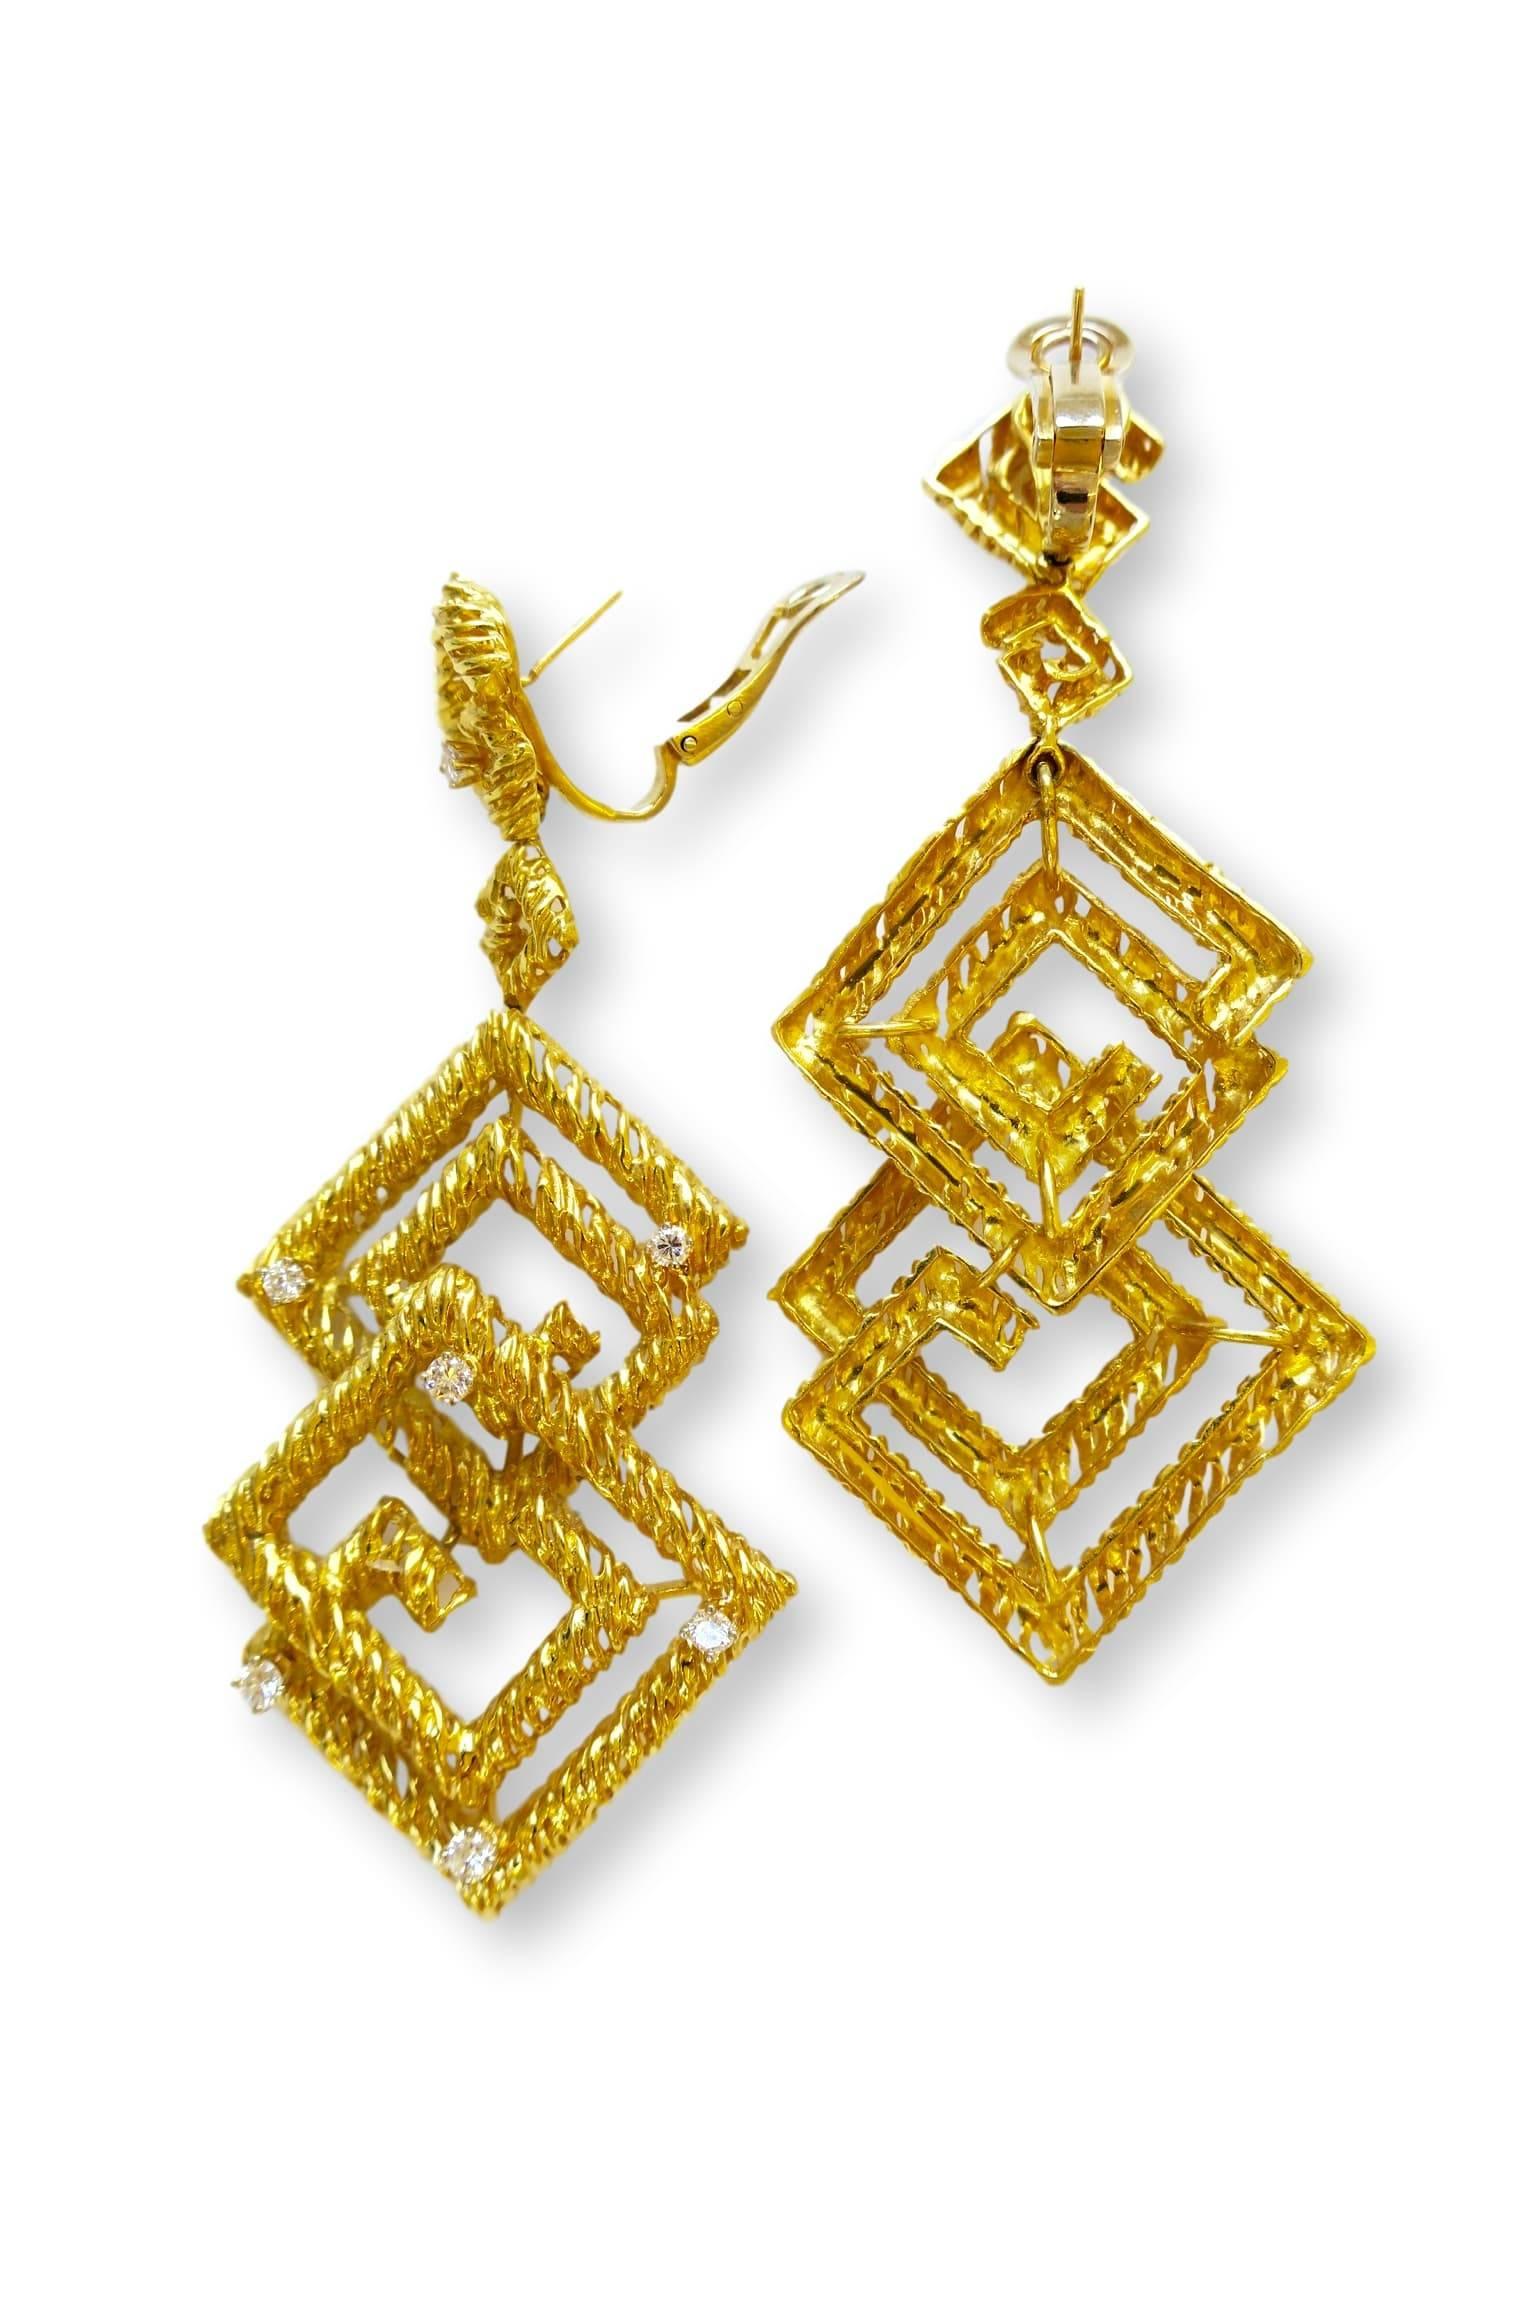 Geometric 18k gold dangle earrings circa 1970. The 3 1/2" x 1 1/2" long earrings each with seven briliiant-cut round white diamonds . Vs1- g color, hinged at the top for movement and hanging from a french clip for security. Love these